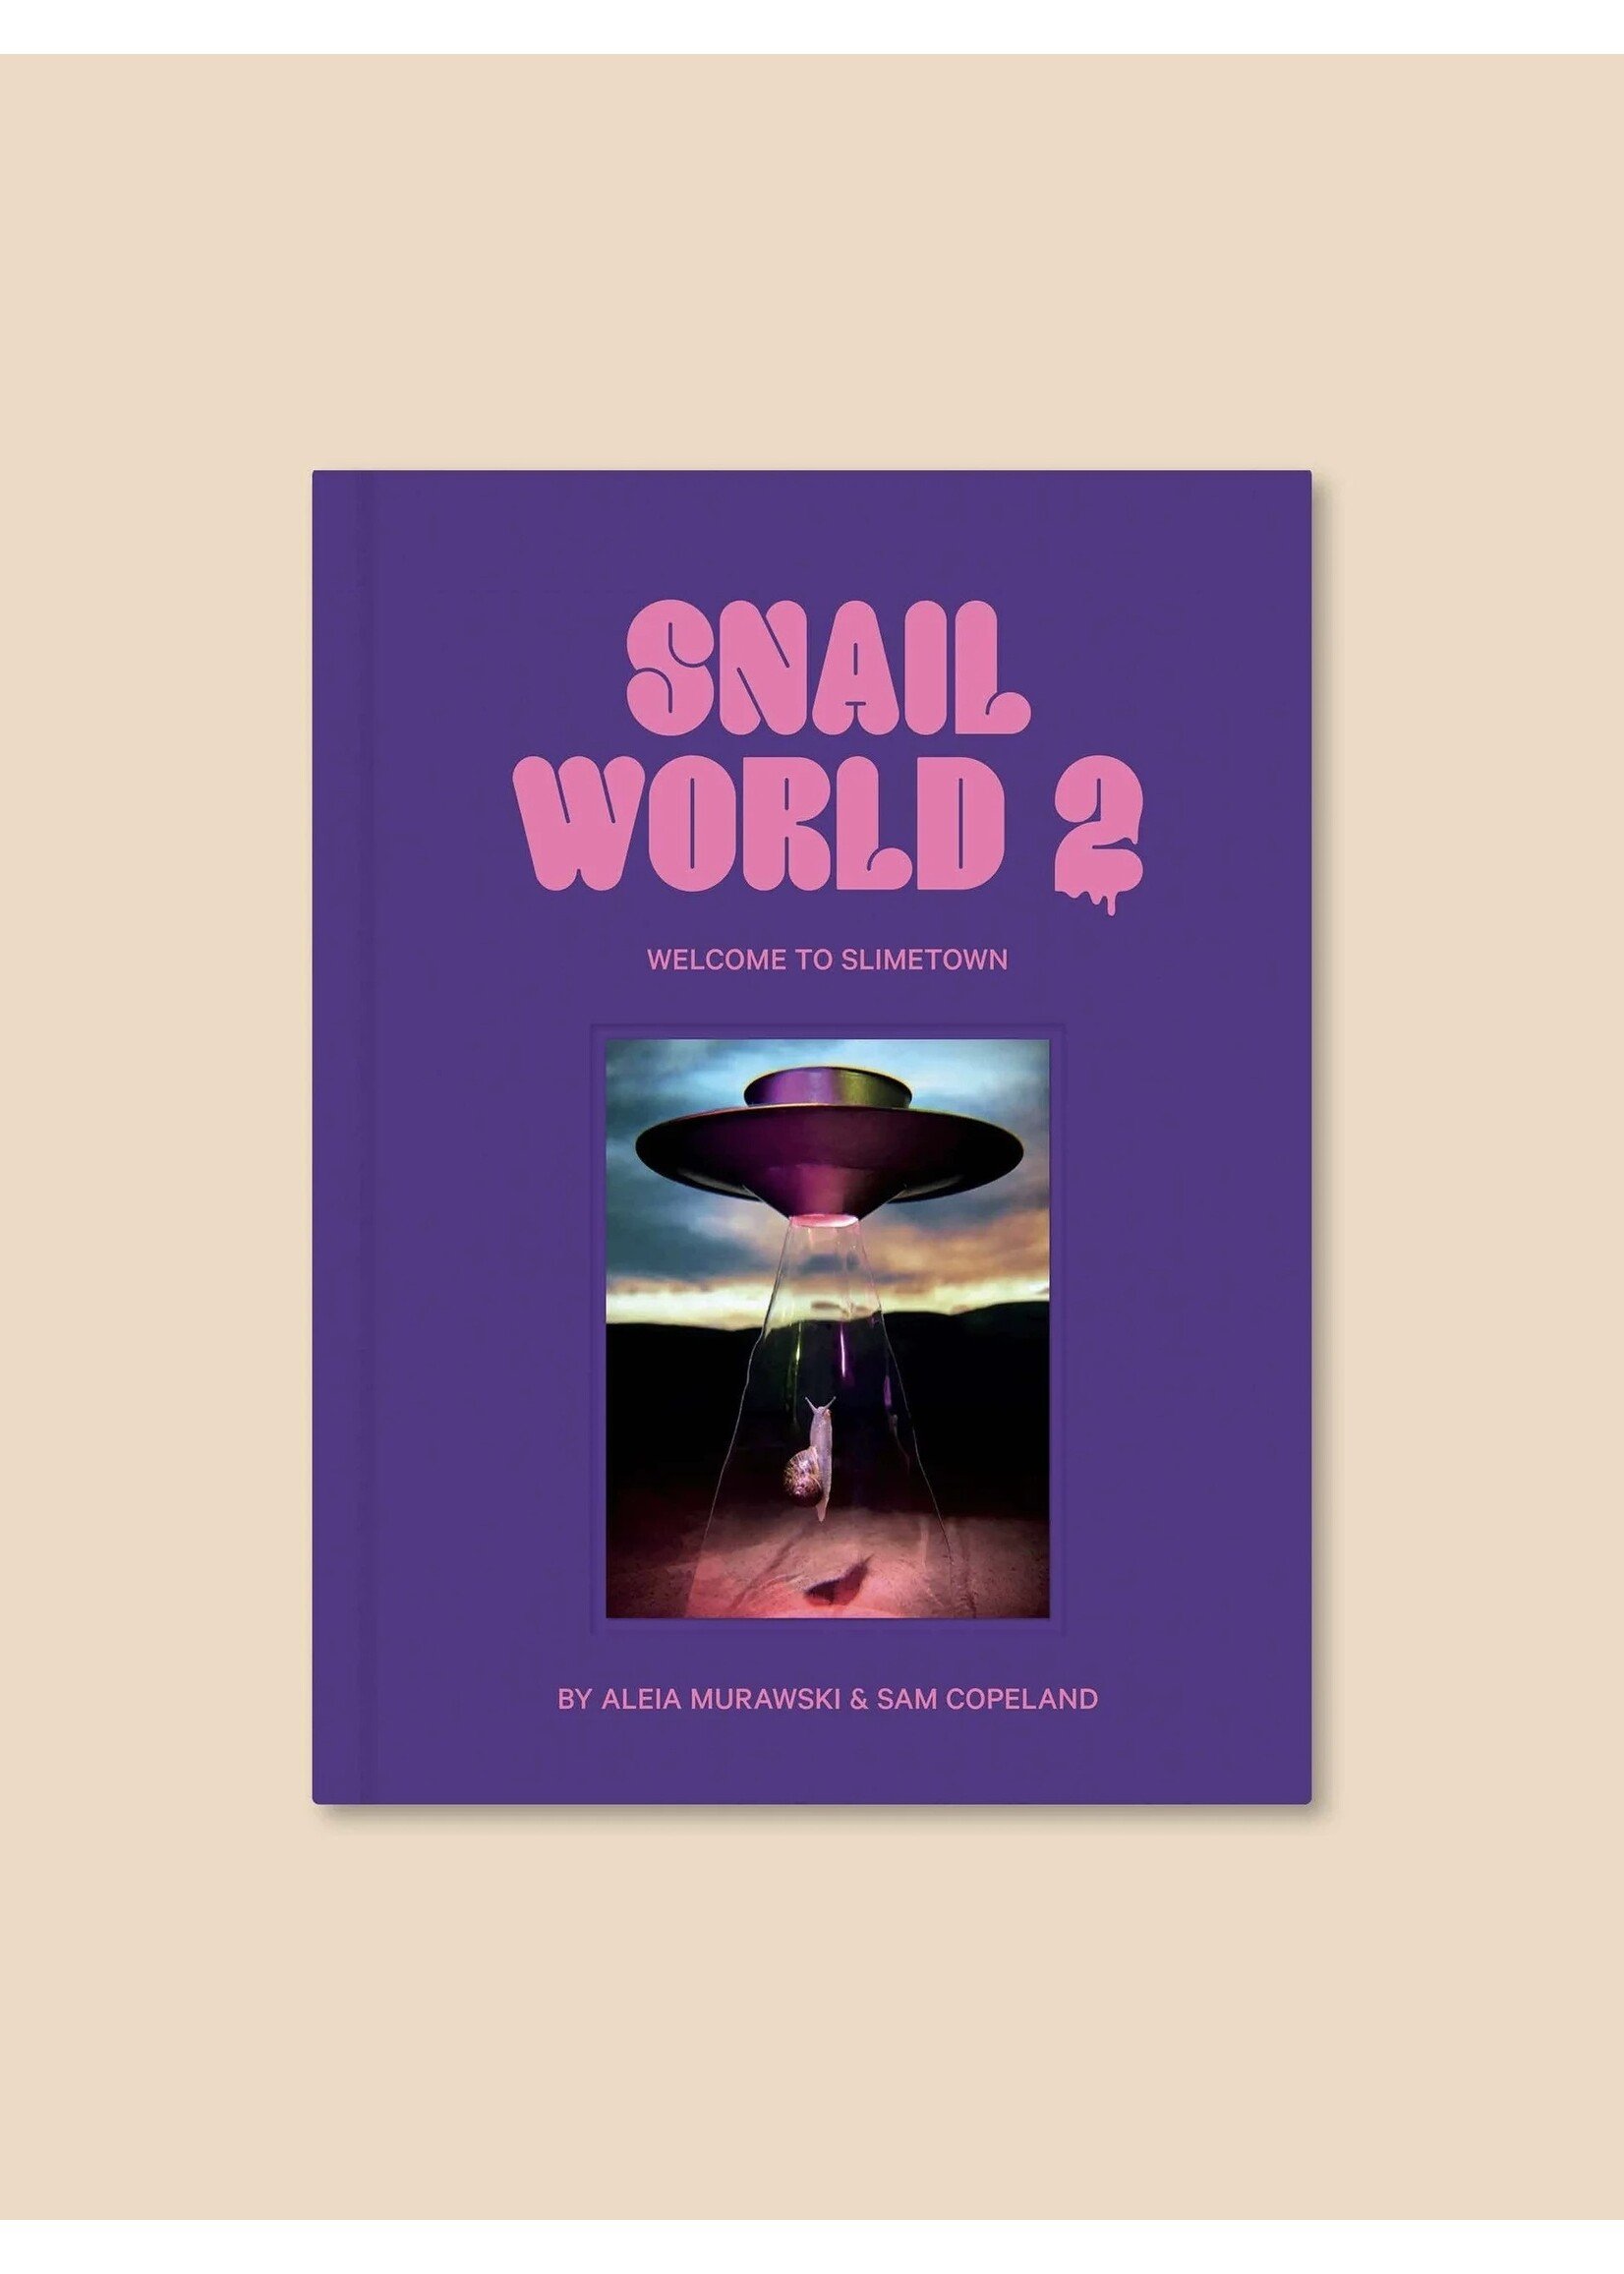 Broccoli Book "Snail World 2: Welcome To Slimetown" by BROCCOLI